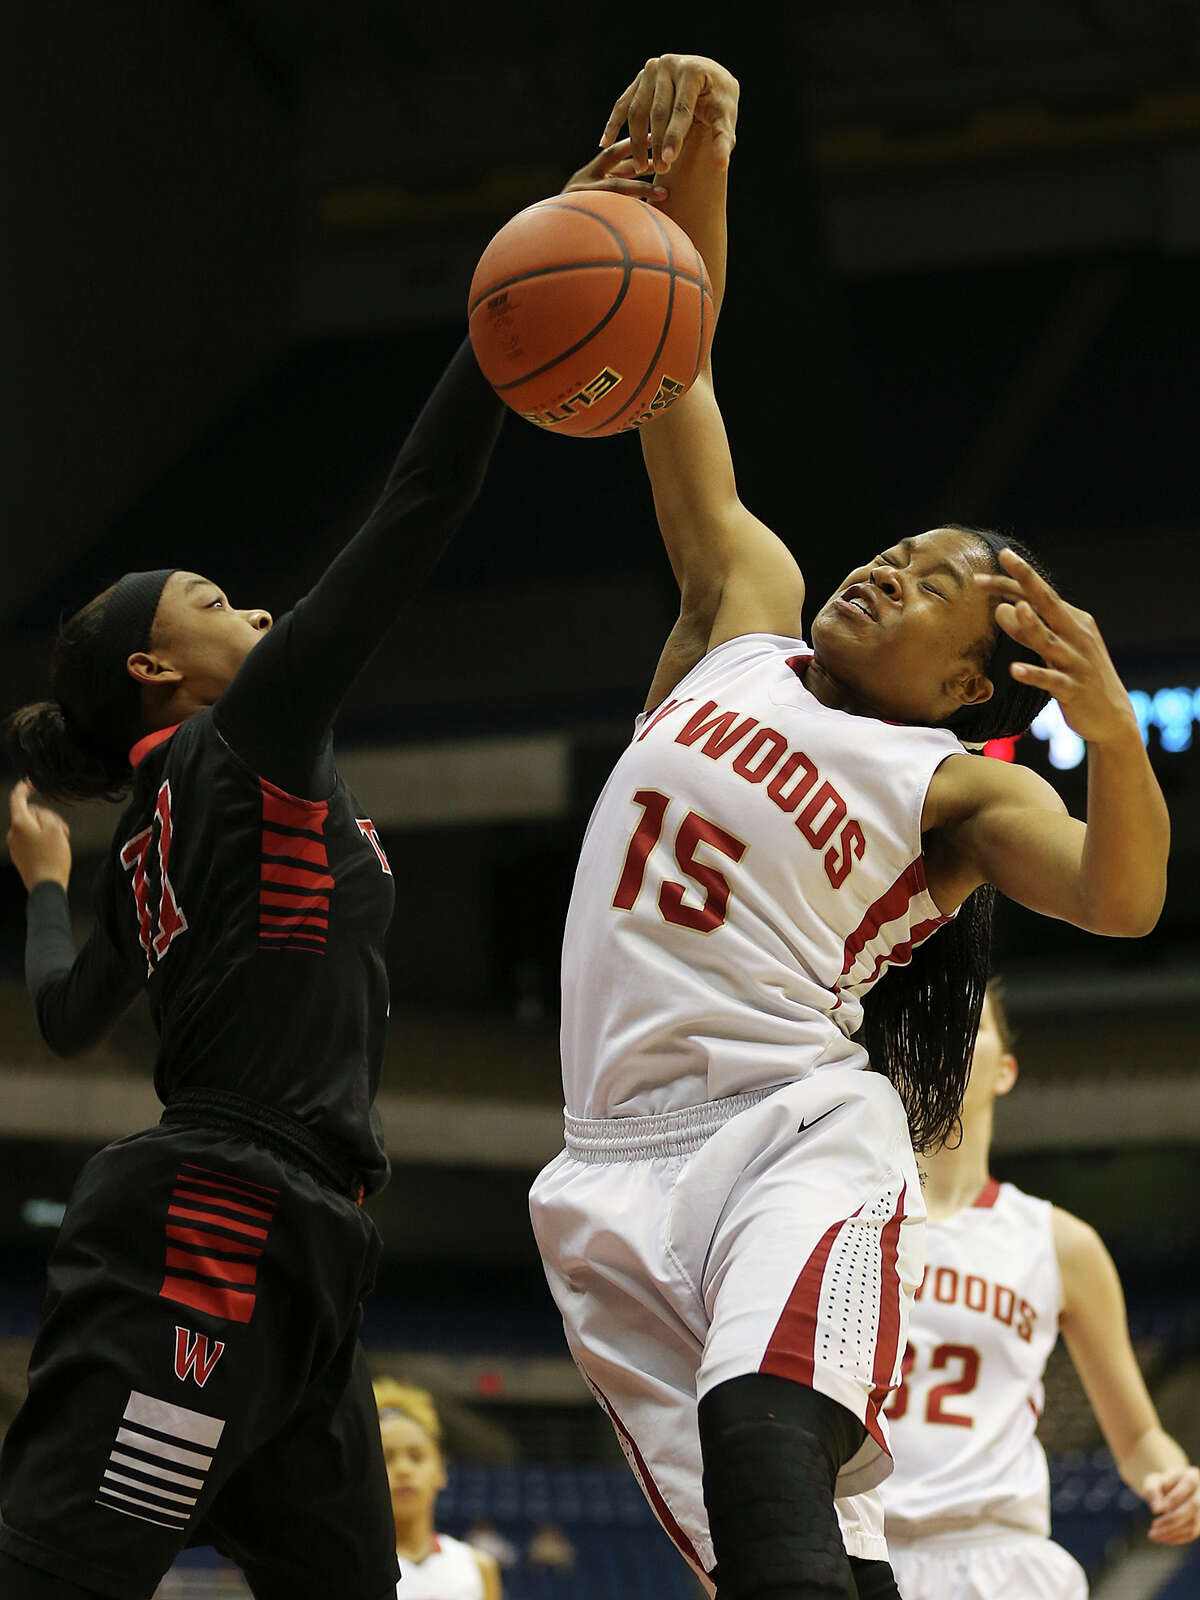 Houston Cypress Woods' Jasmine Williams grabs the rebound against San Antonio Wagner's Dessiere Johnson during first half of the UIL GirlâÄôs Basketball 6A State semifinals at the Alamodome, Friday, March 6, 2015